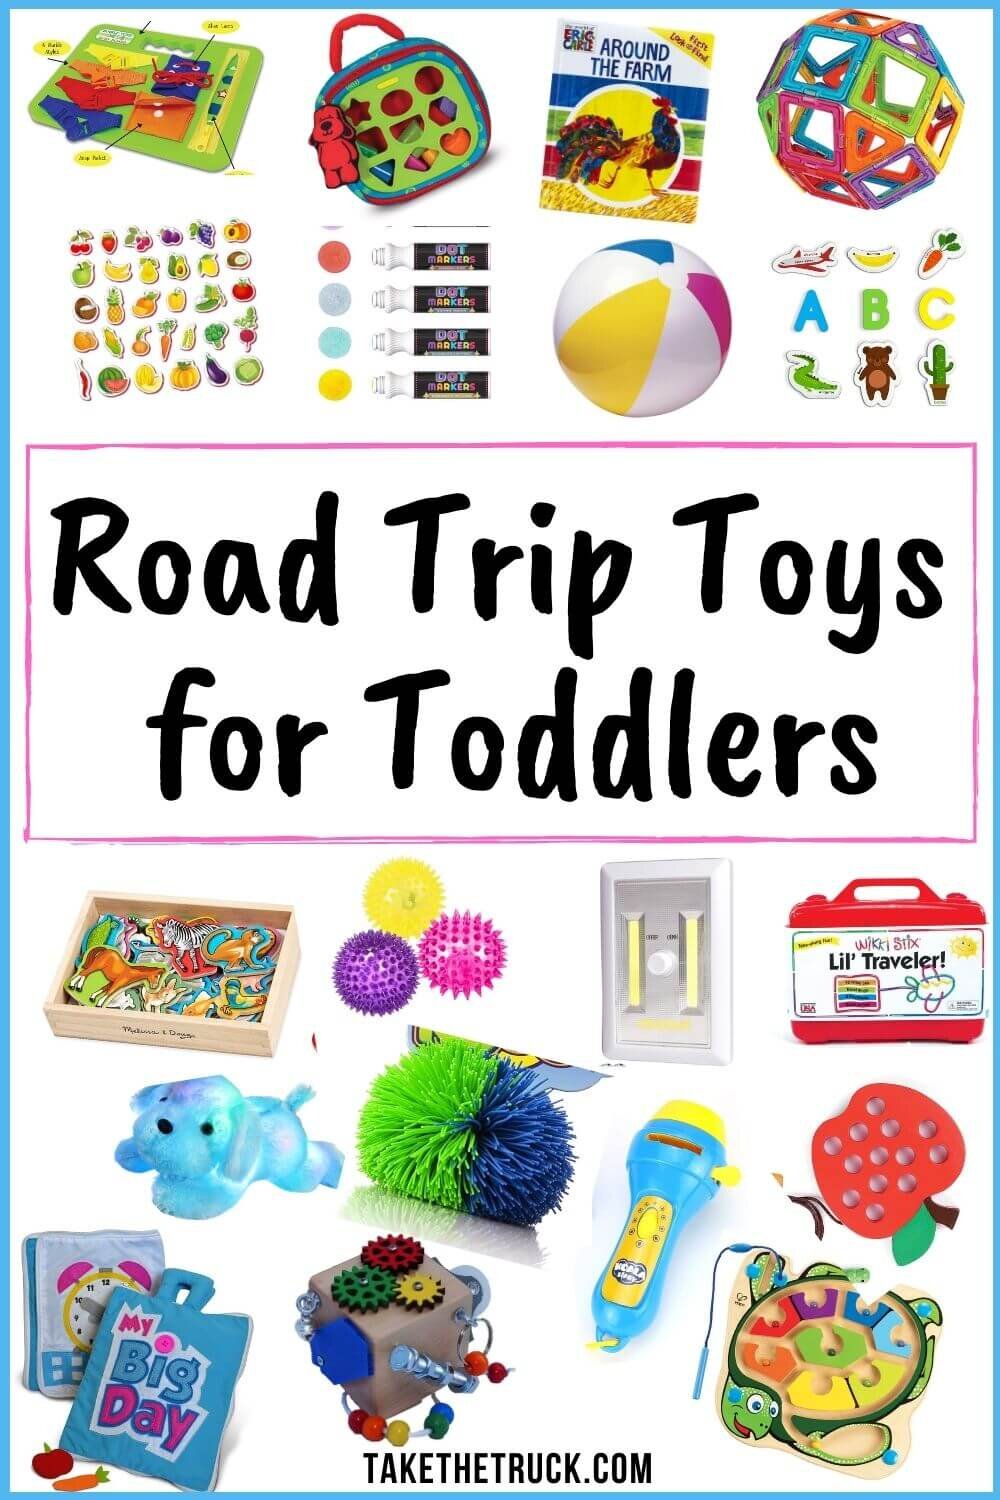 Read this post for great road trip activities for toddlers, whether you’re looking for DIY road trip activities or for the best travel toys to purchase as road trip entertainment for your toddler.